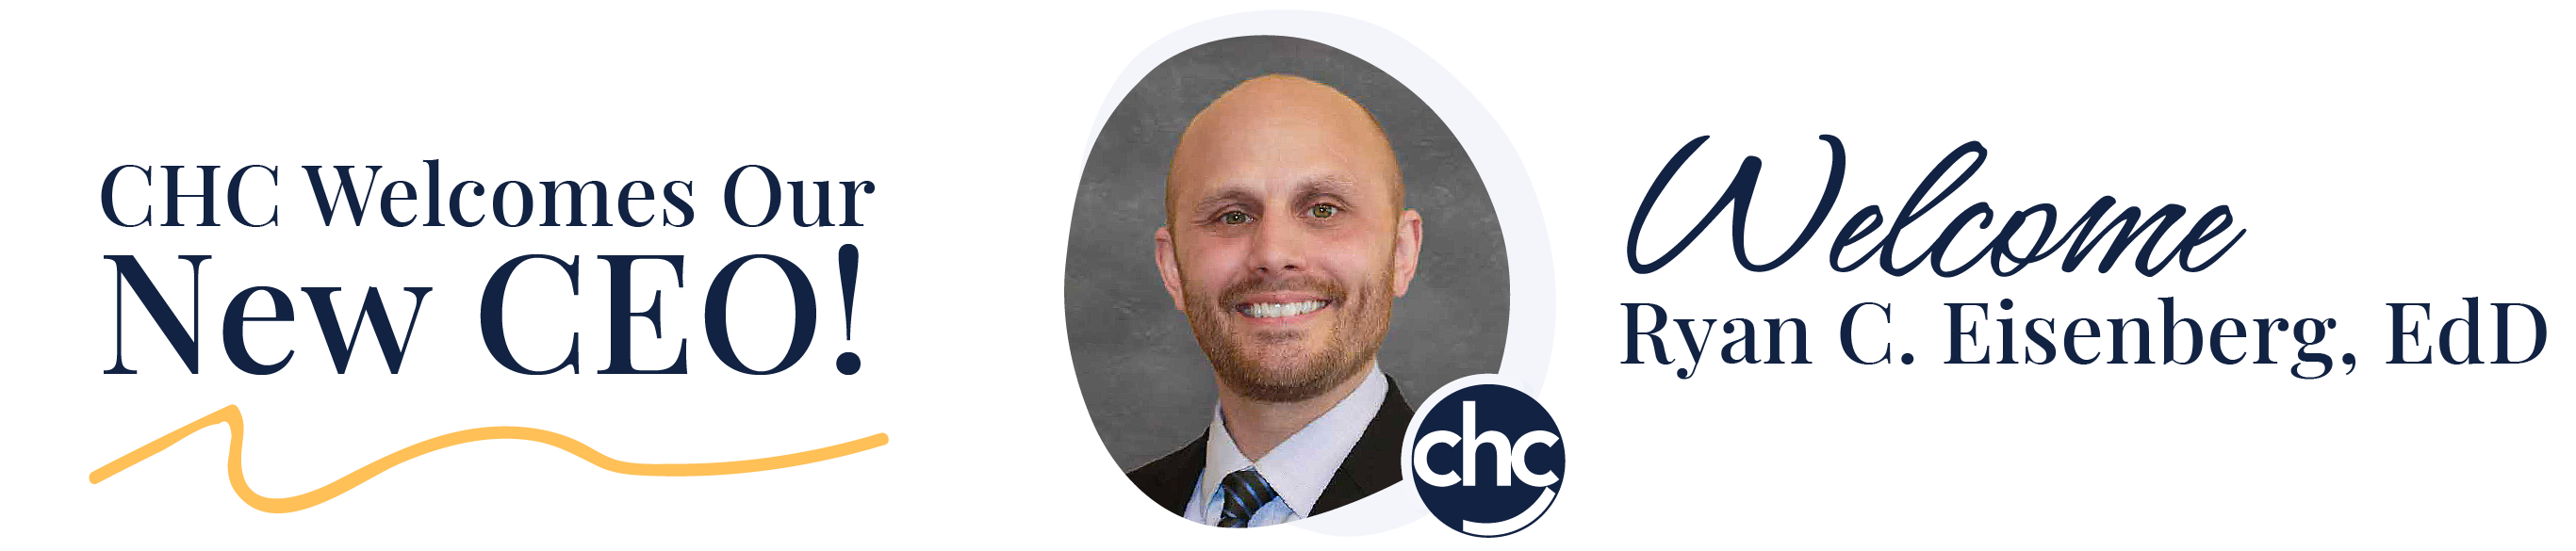 CHC Welcomes Our New CEO! Welcome, Ryan C. Eisenberg, EdD